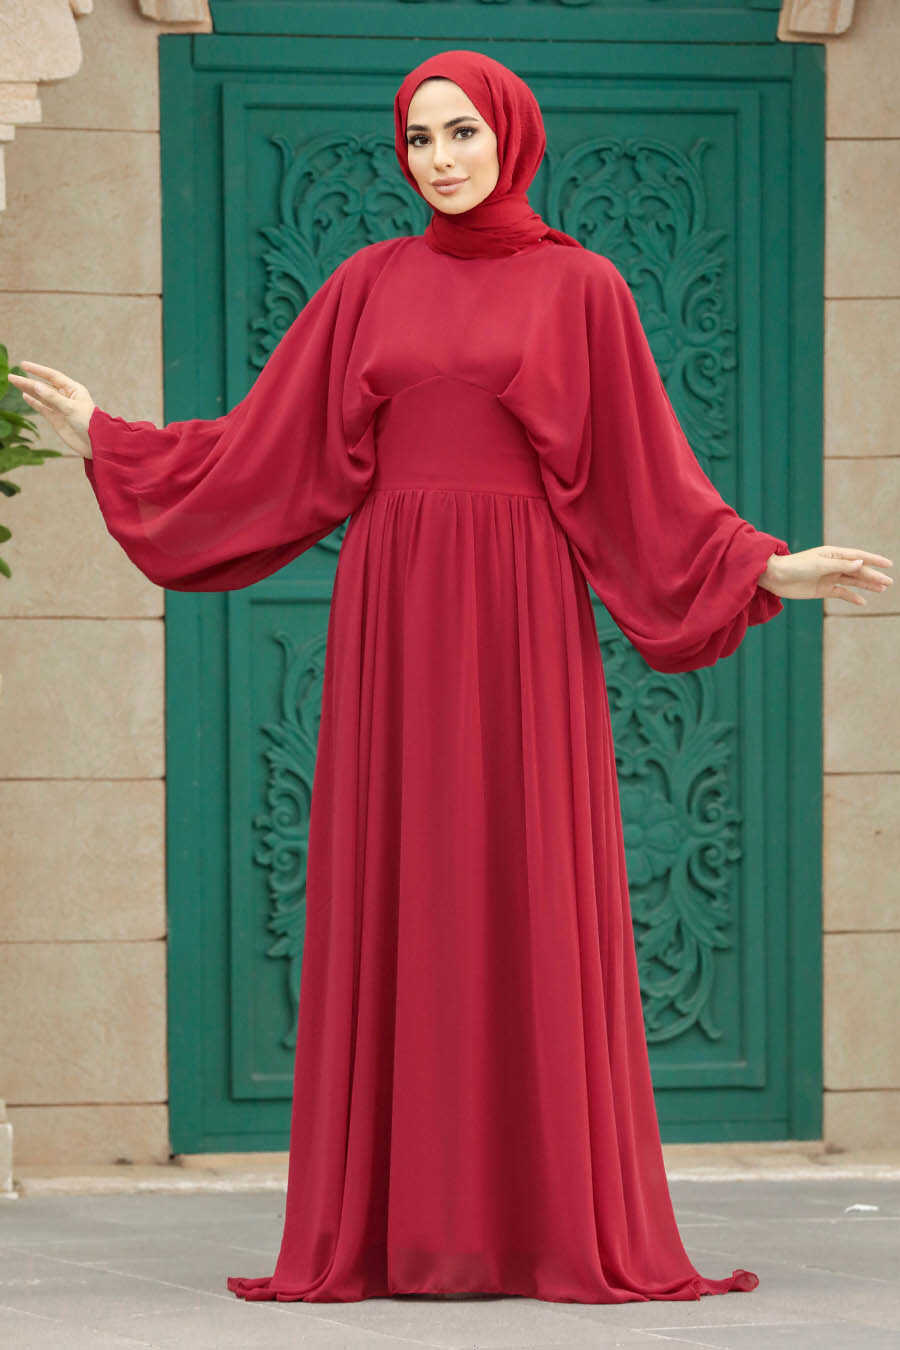 Neva Style - Red Turkish Hijab Engagement Gown 60681K